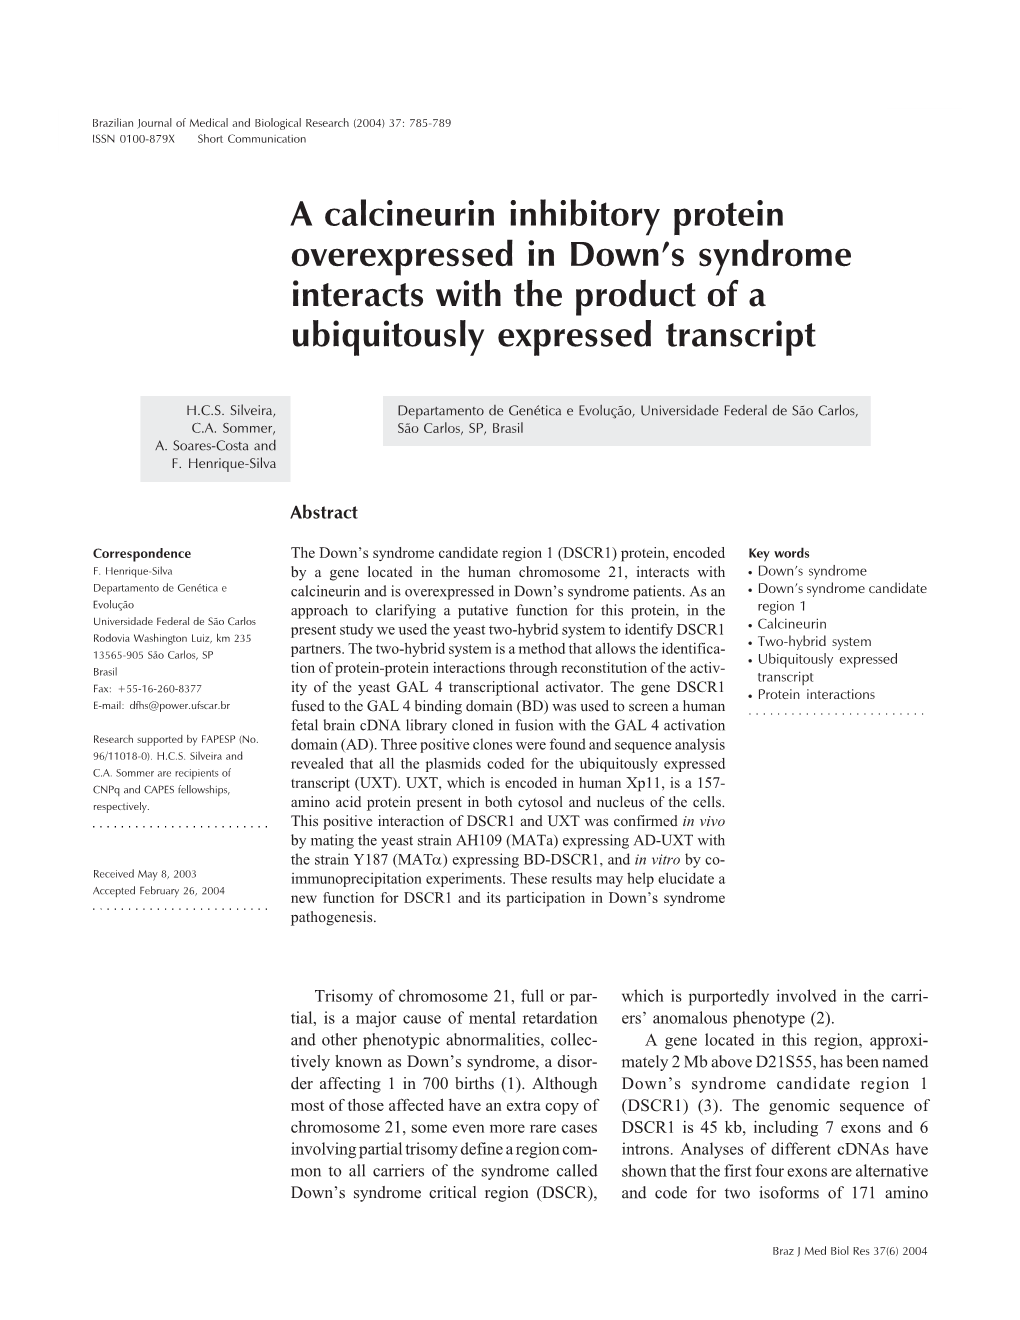 A Calcineurin Inhibitory Protein Overexpressed in Down's Syndrome